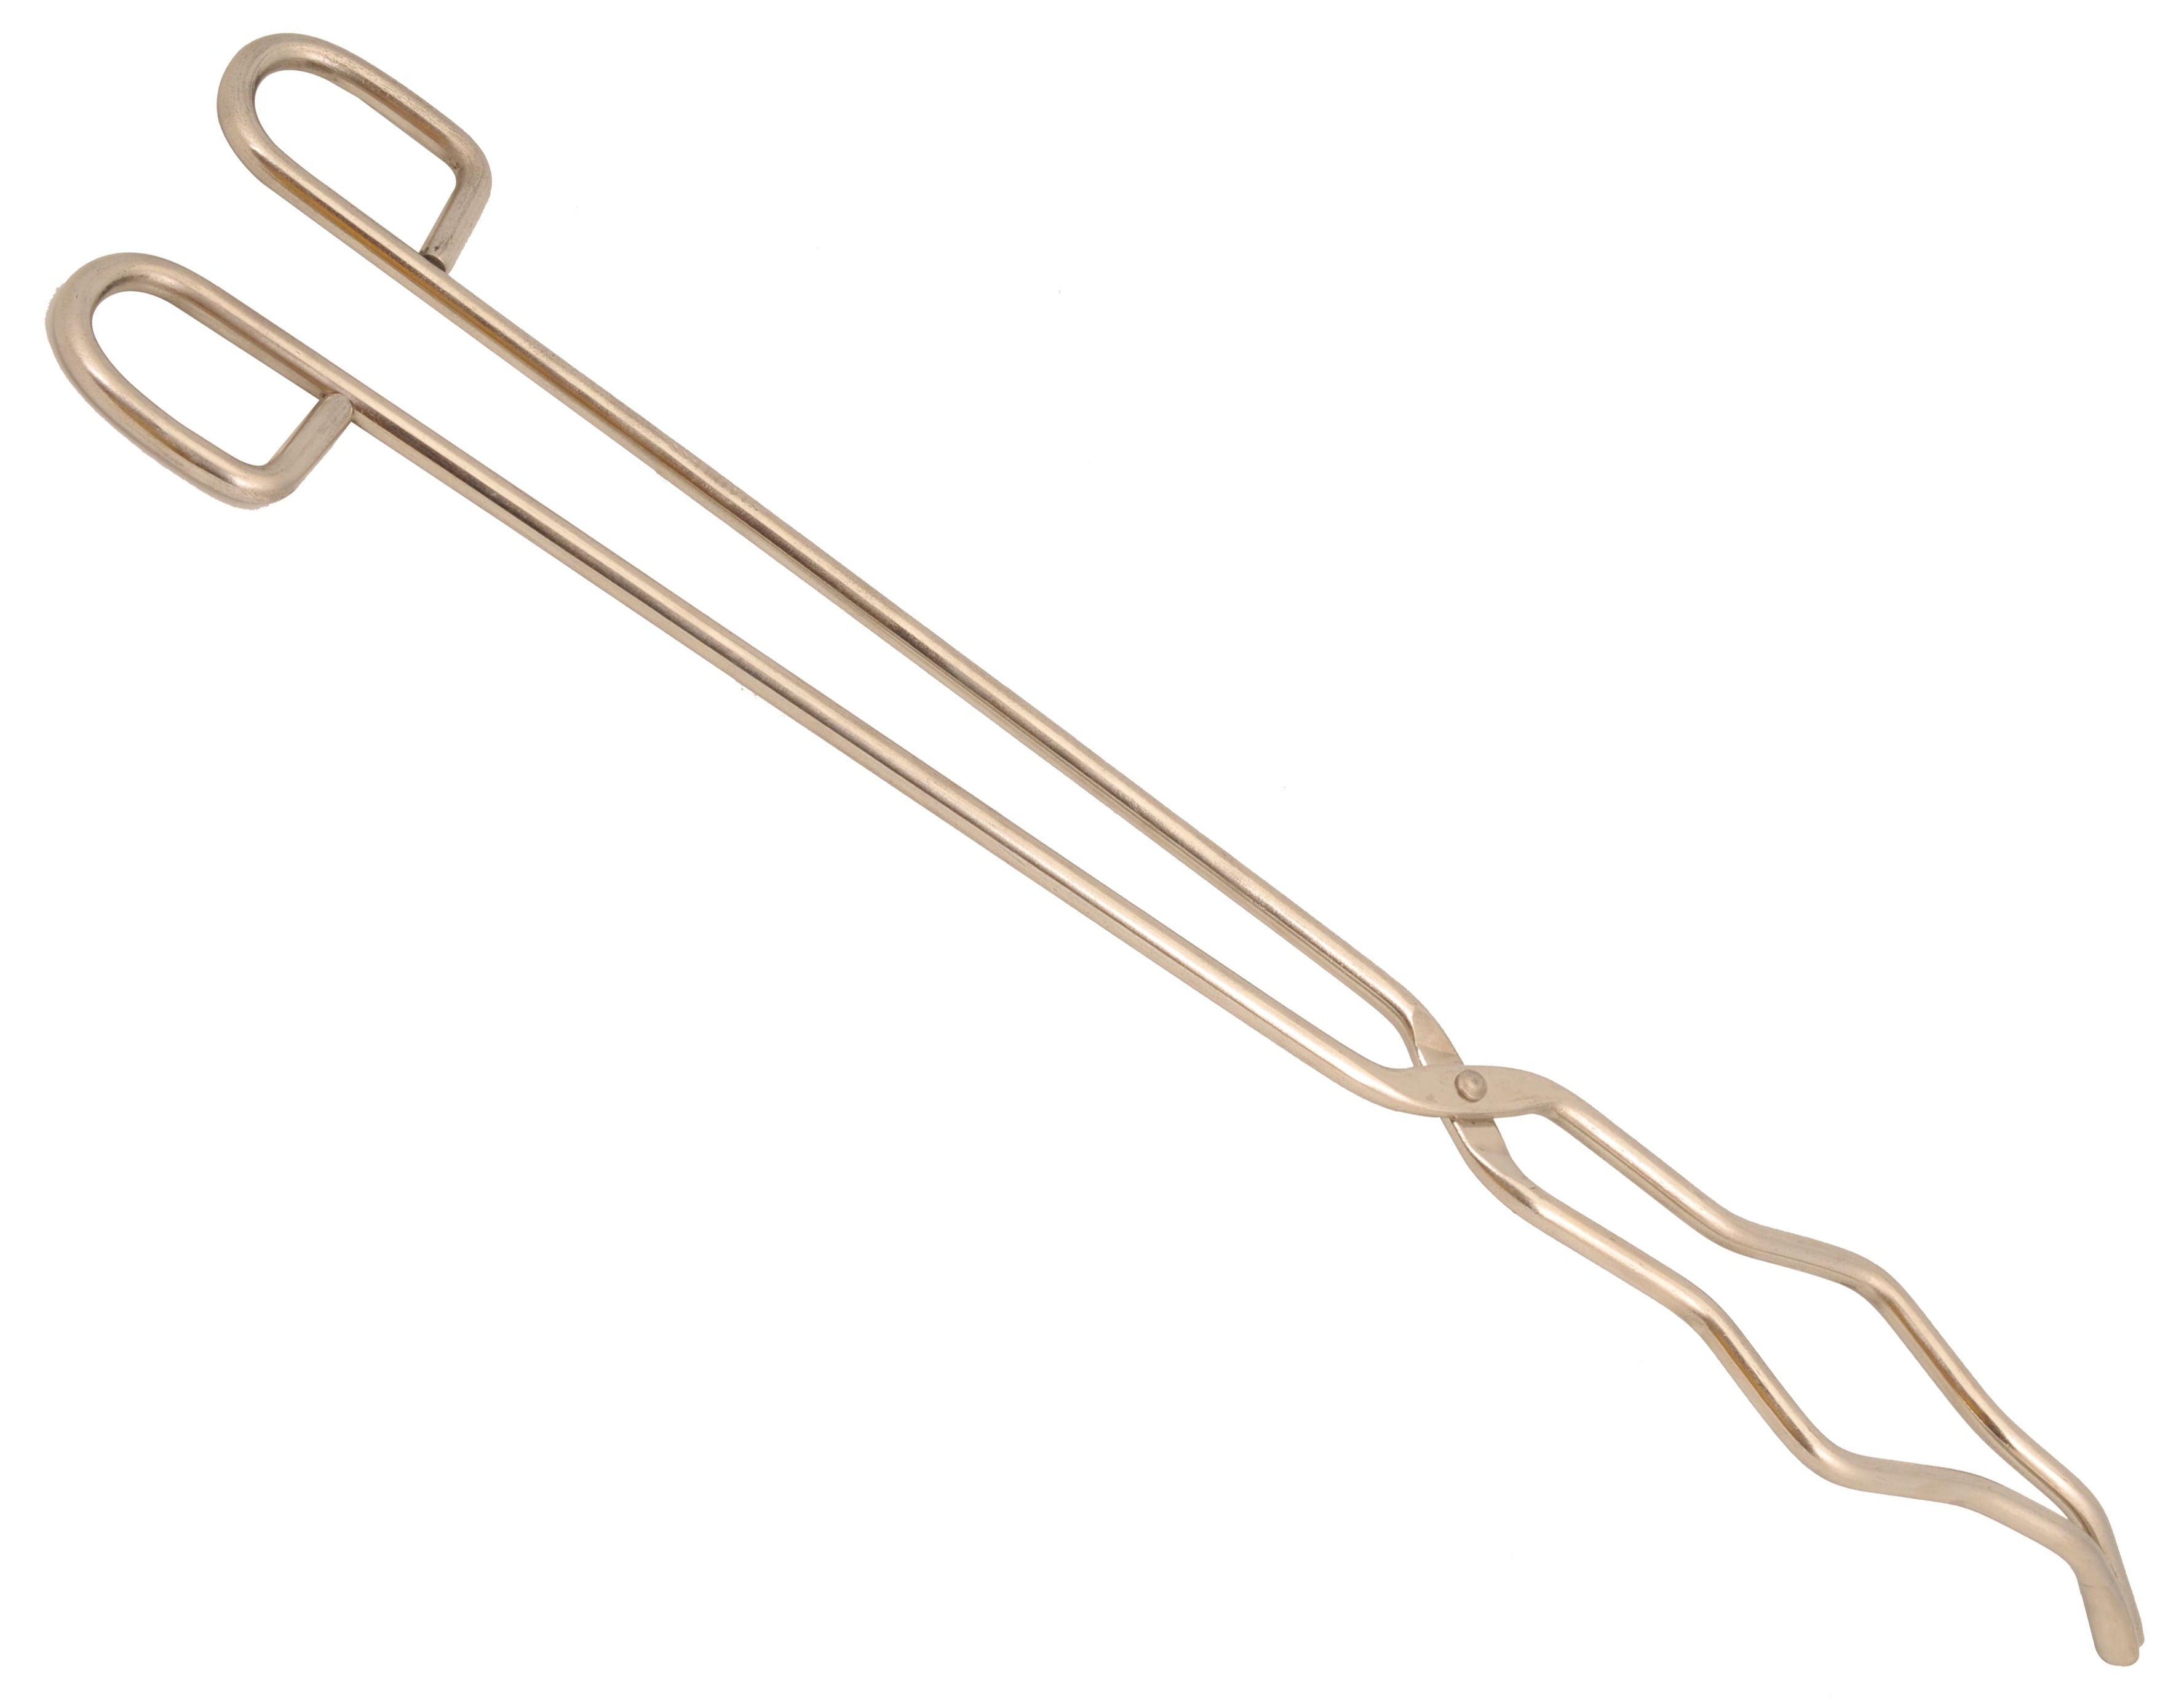 Eisco Straight Crucible Tongs 30 cm:Clamps and Supports, Quantity